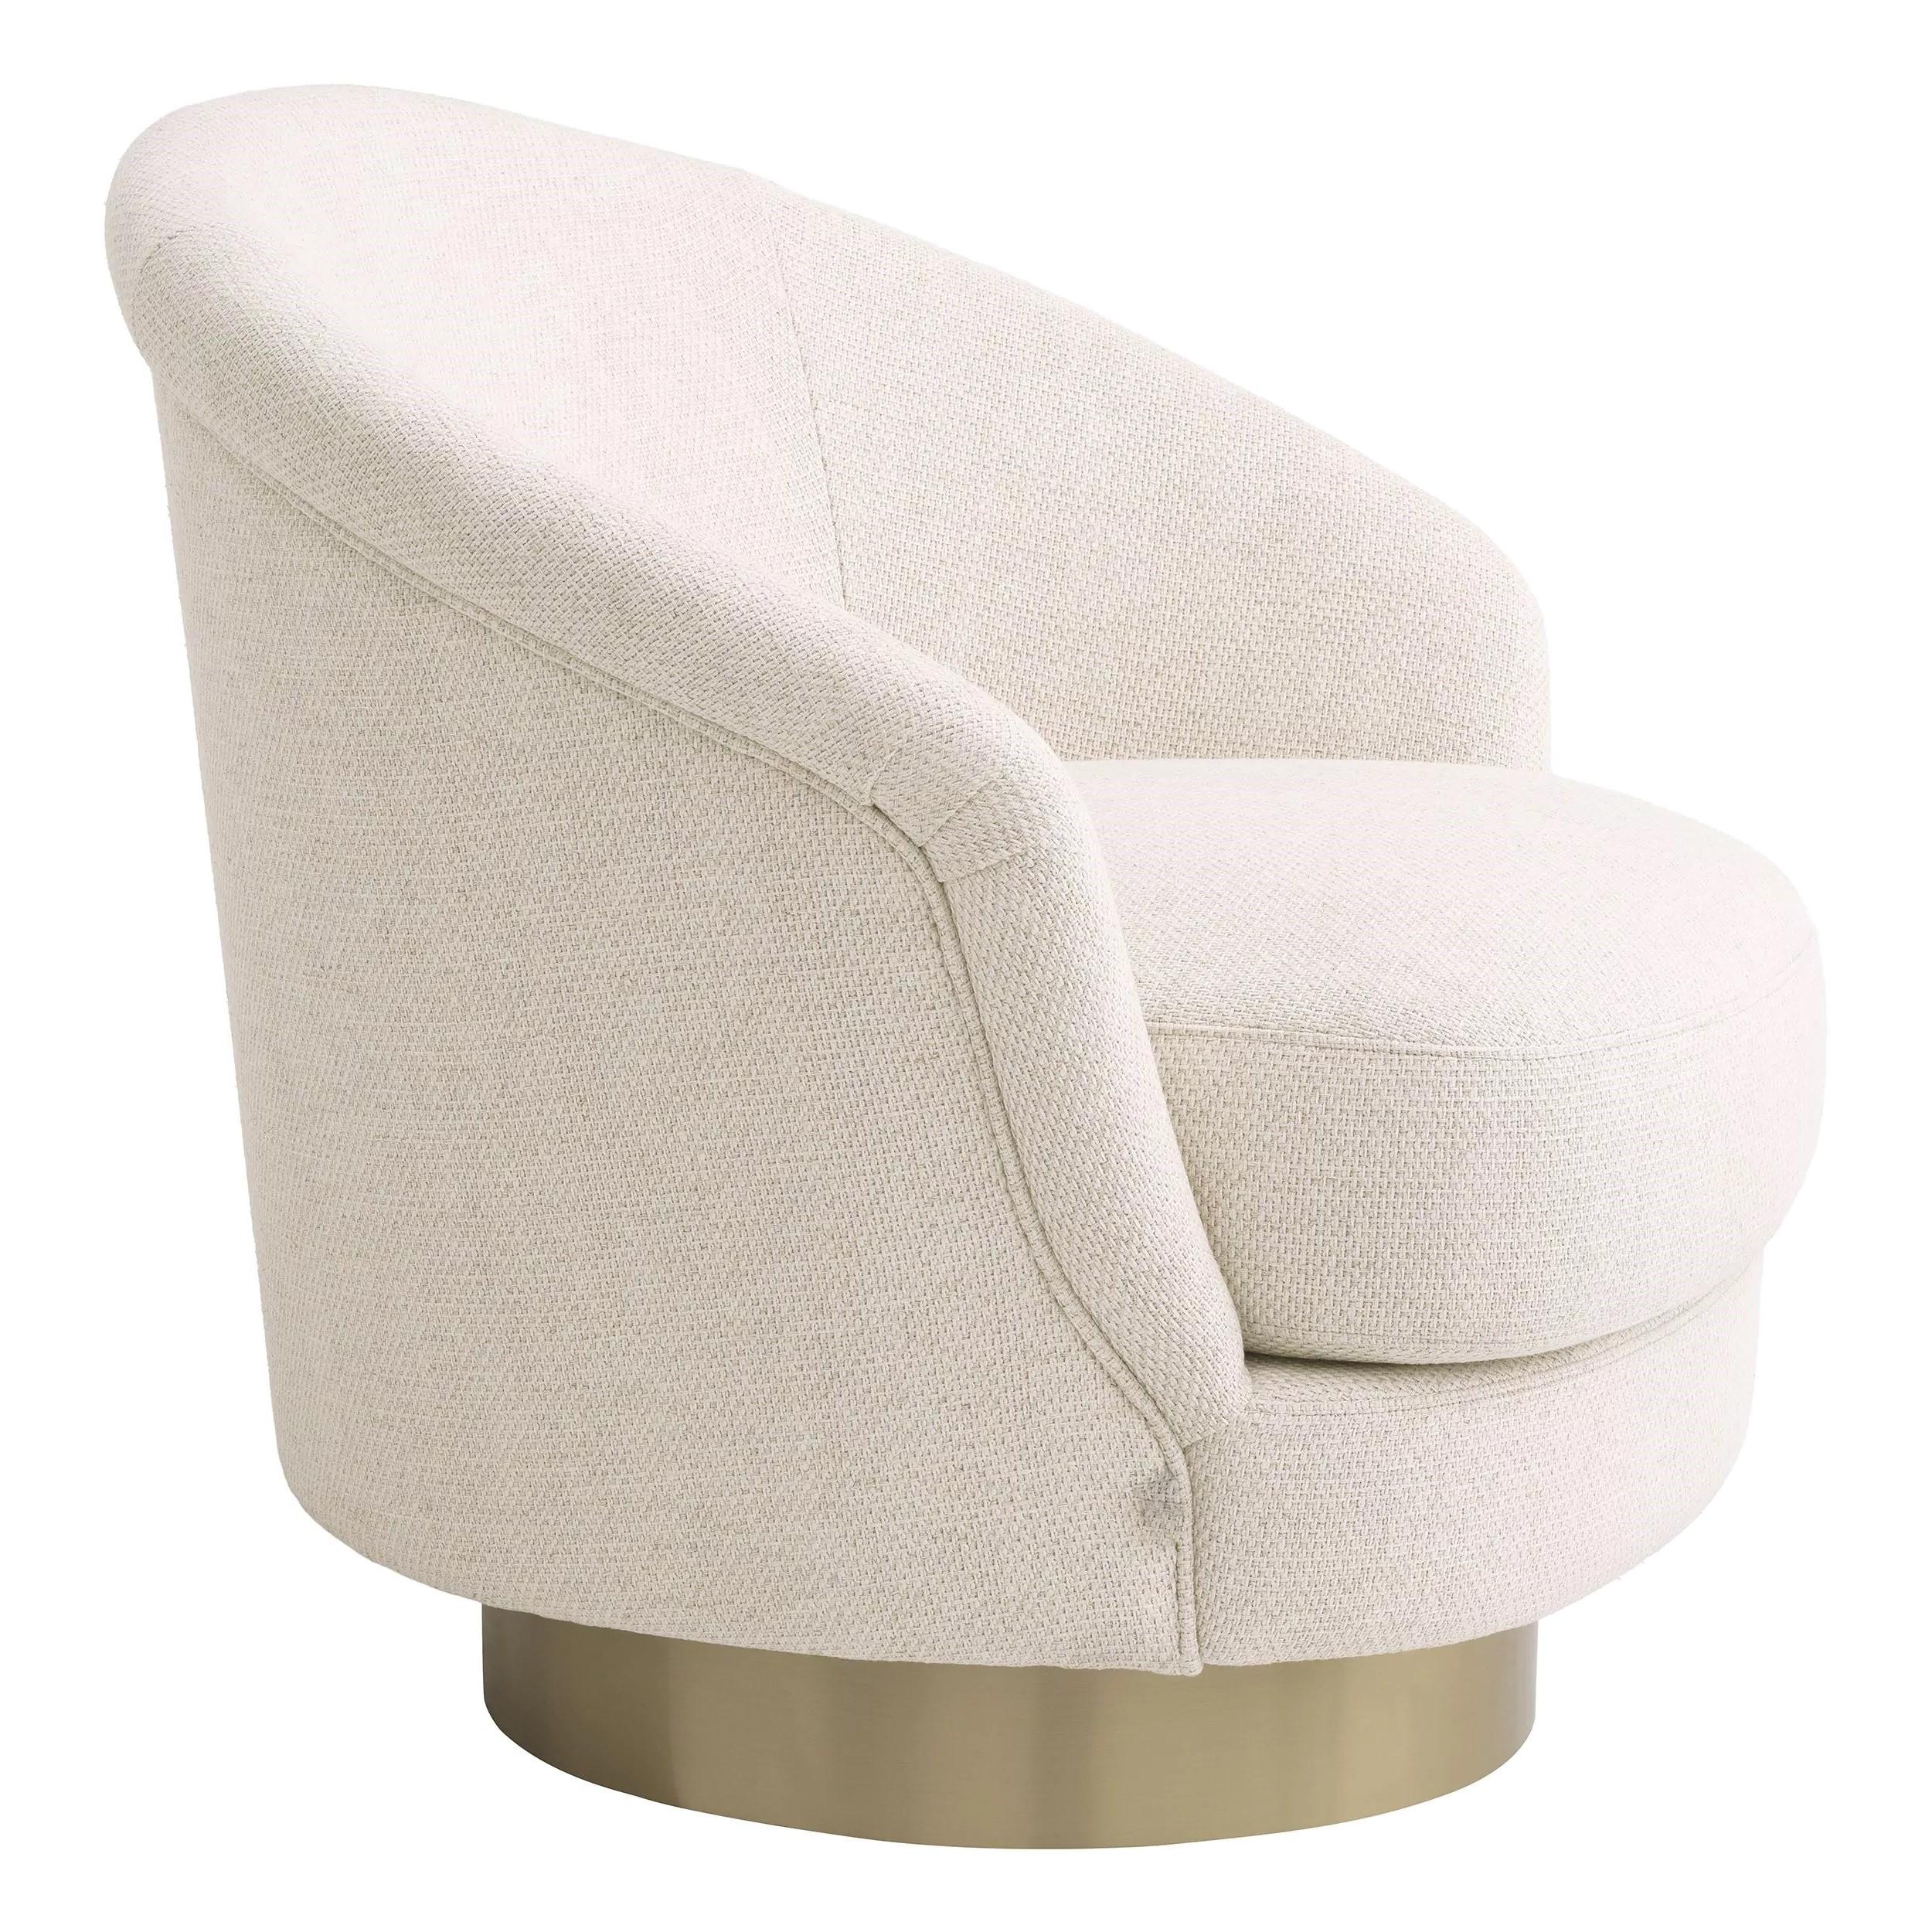 Welcoming and curved swivel armchair in beige fabric with brass finishes base.